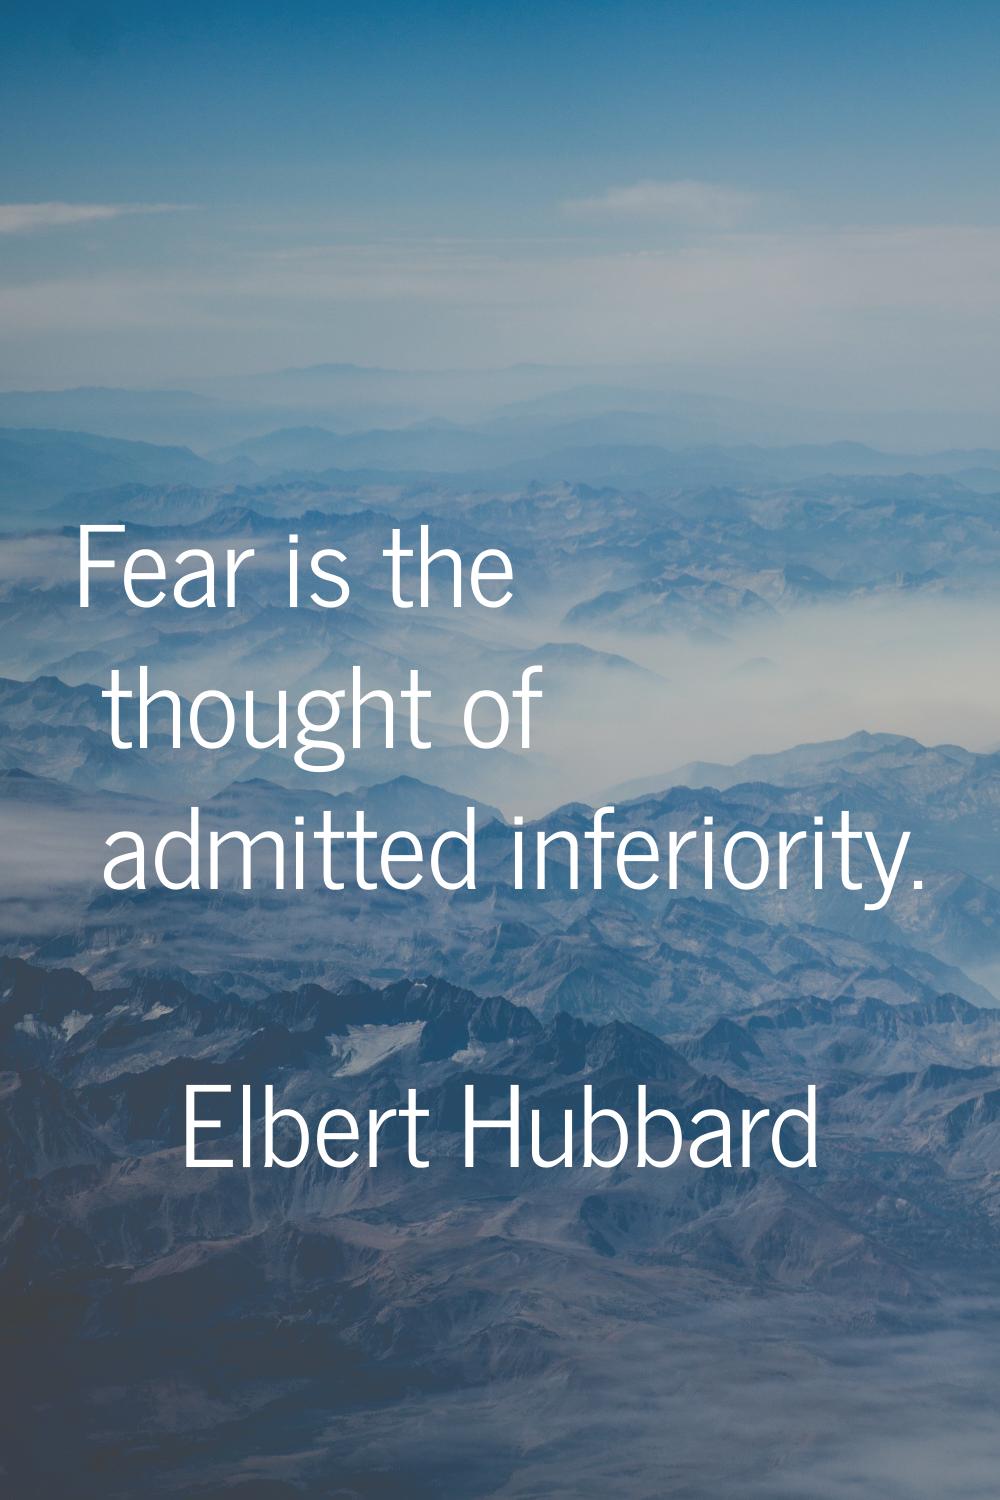 Fear is the thought of admitted inferiority.